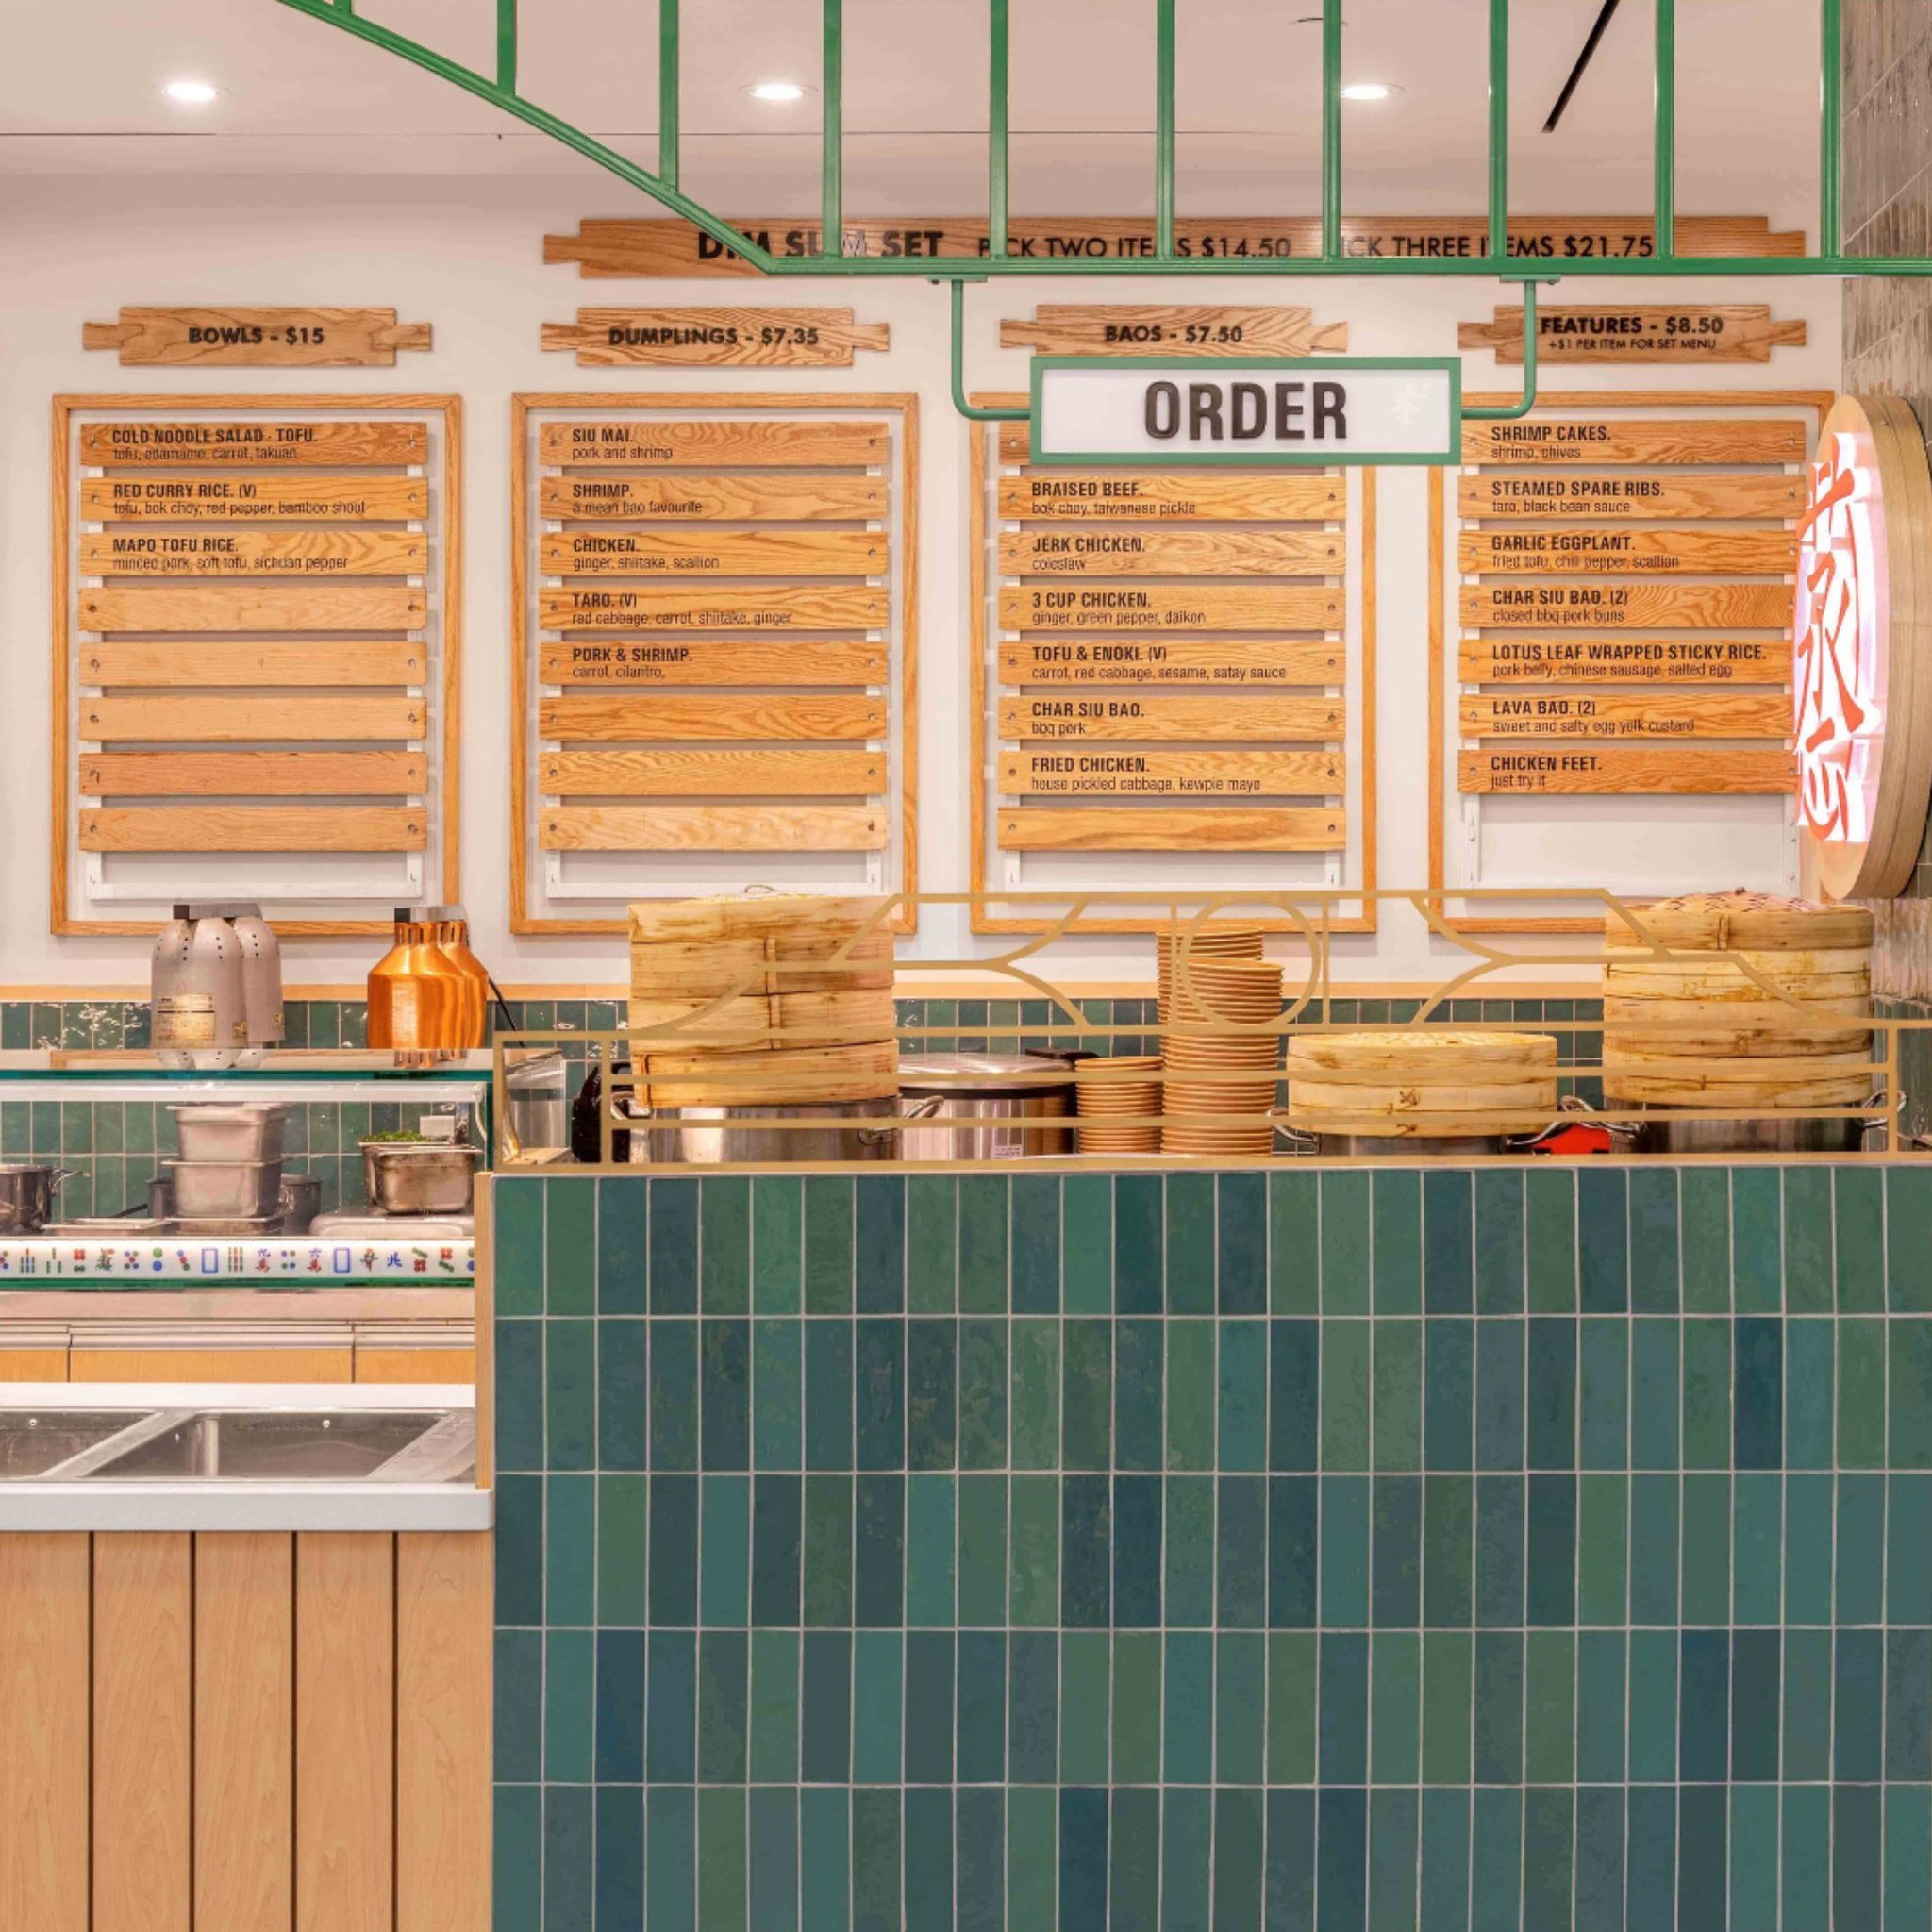 Mean Bao not only serves mouthwatering food but also prioritizes efficiency and convenience.

Their space is designed to streamline day-to-day operations for employees and customers, reducing wait times and enhancing the overall dining experience.

?